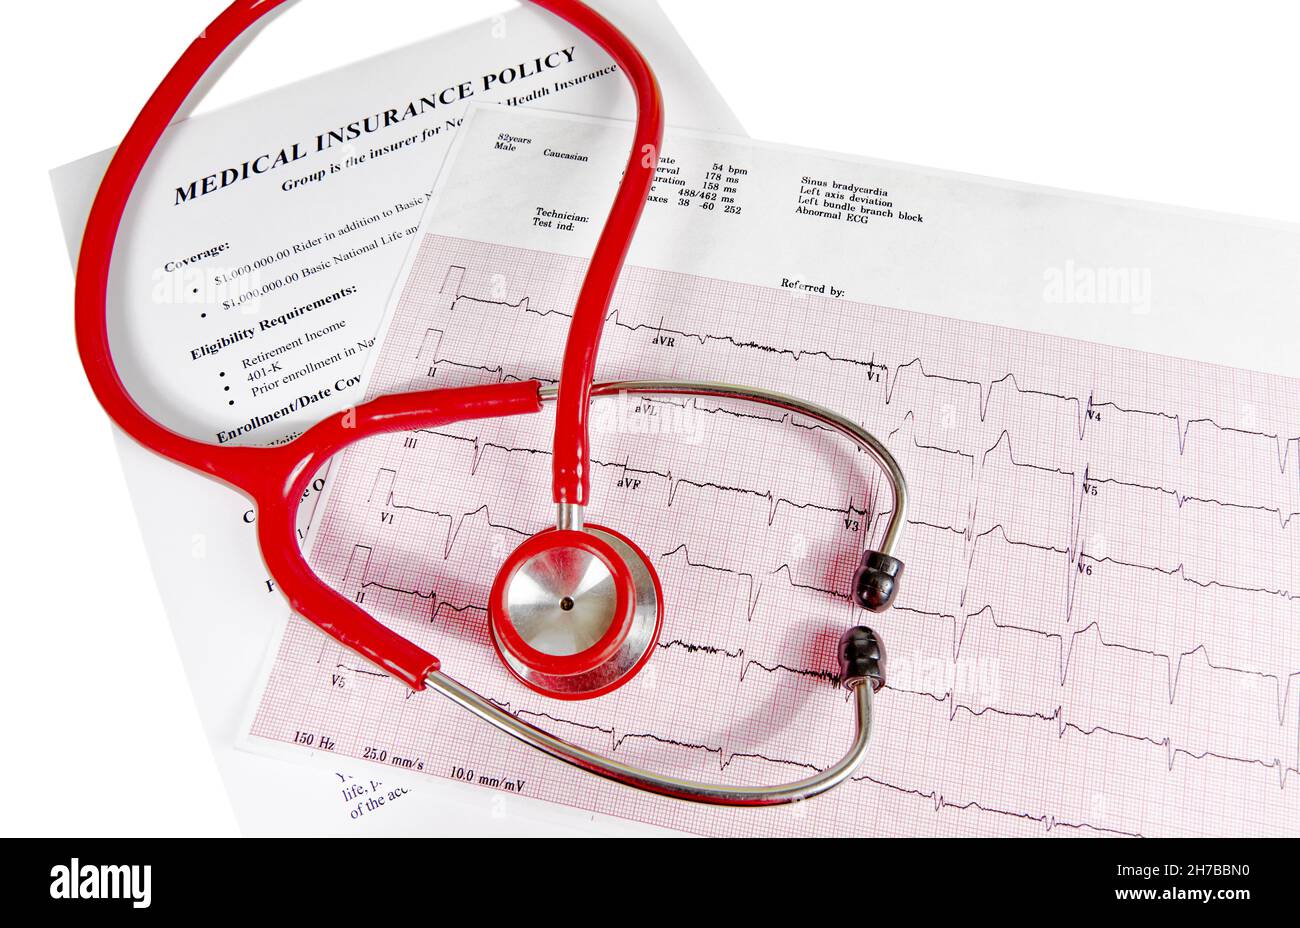 Ecocardiography report (ECG) showing irregular heartbeat with a medical insurance policy underneath and a red stethoscope on top of it isolated on whi Stock Photo